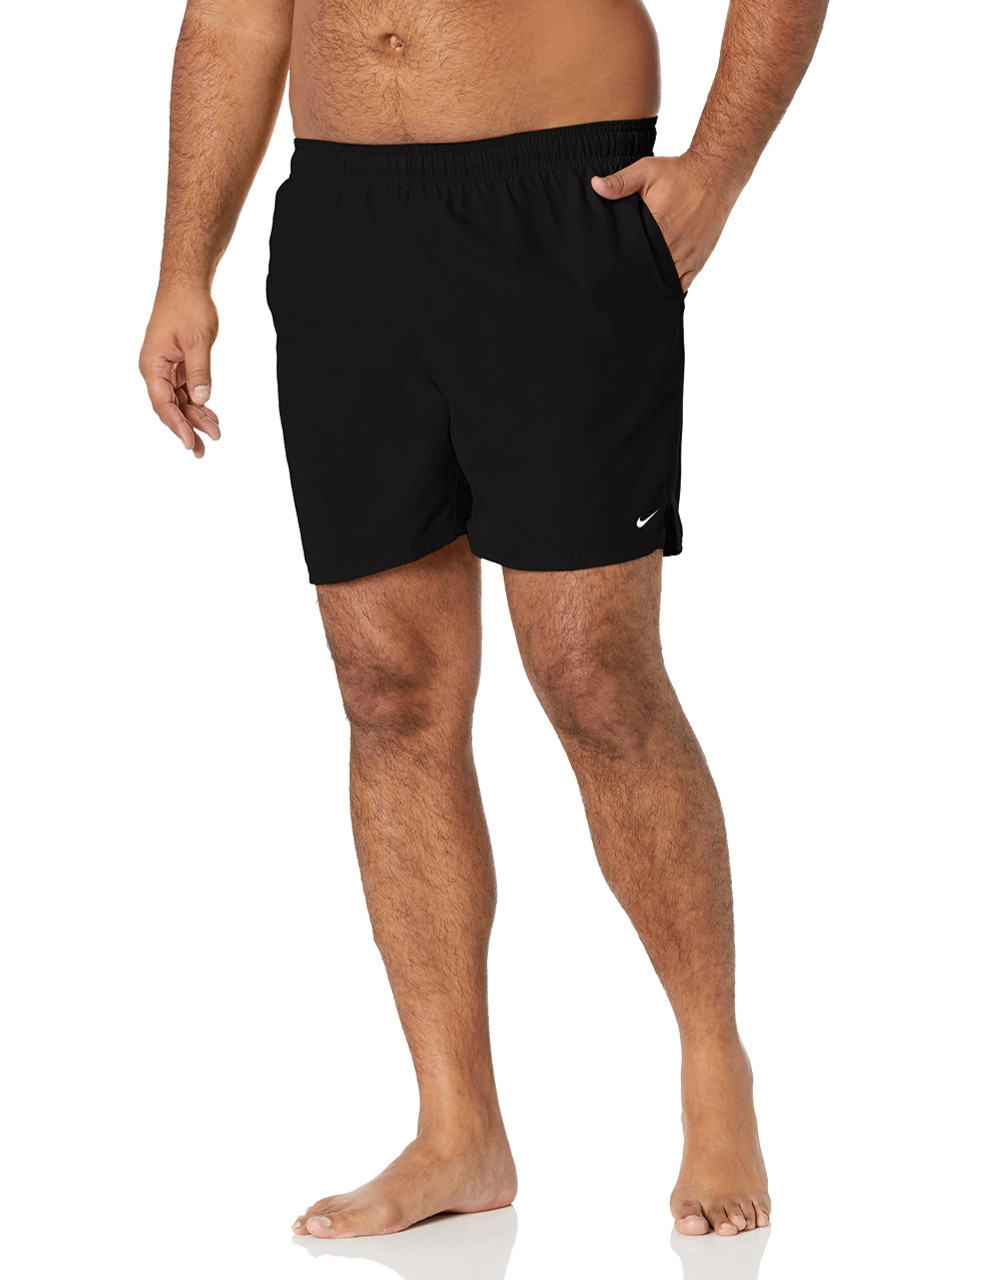 Nike Mens Solid Lap 7 Inch Volley Short Swim Trunk - Black White